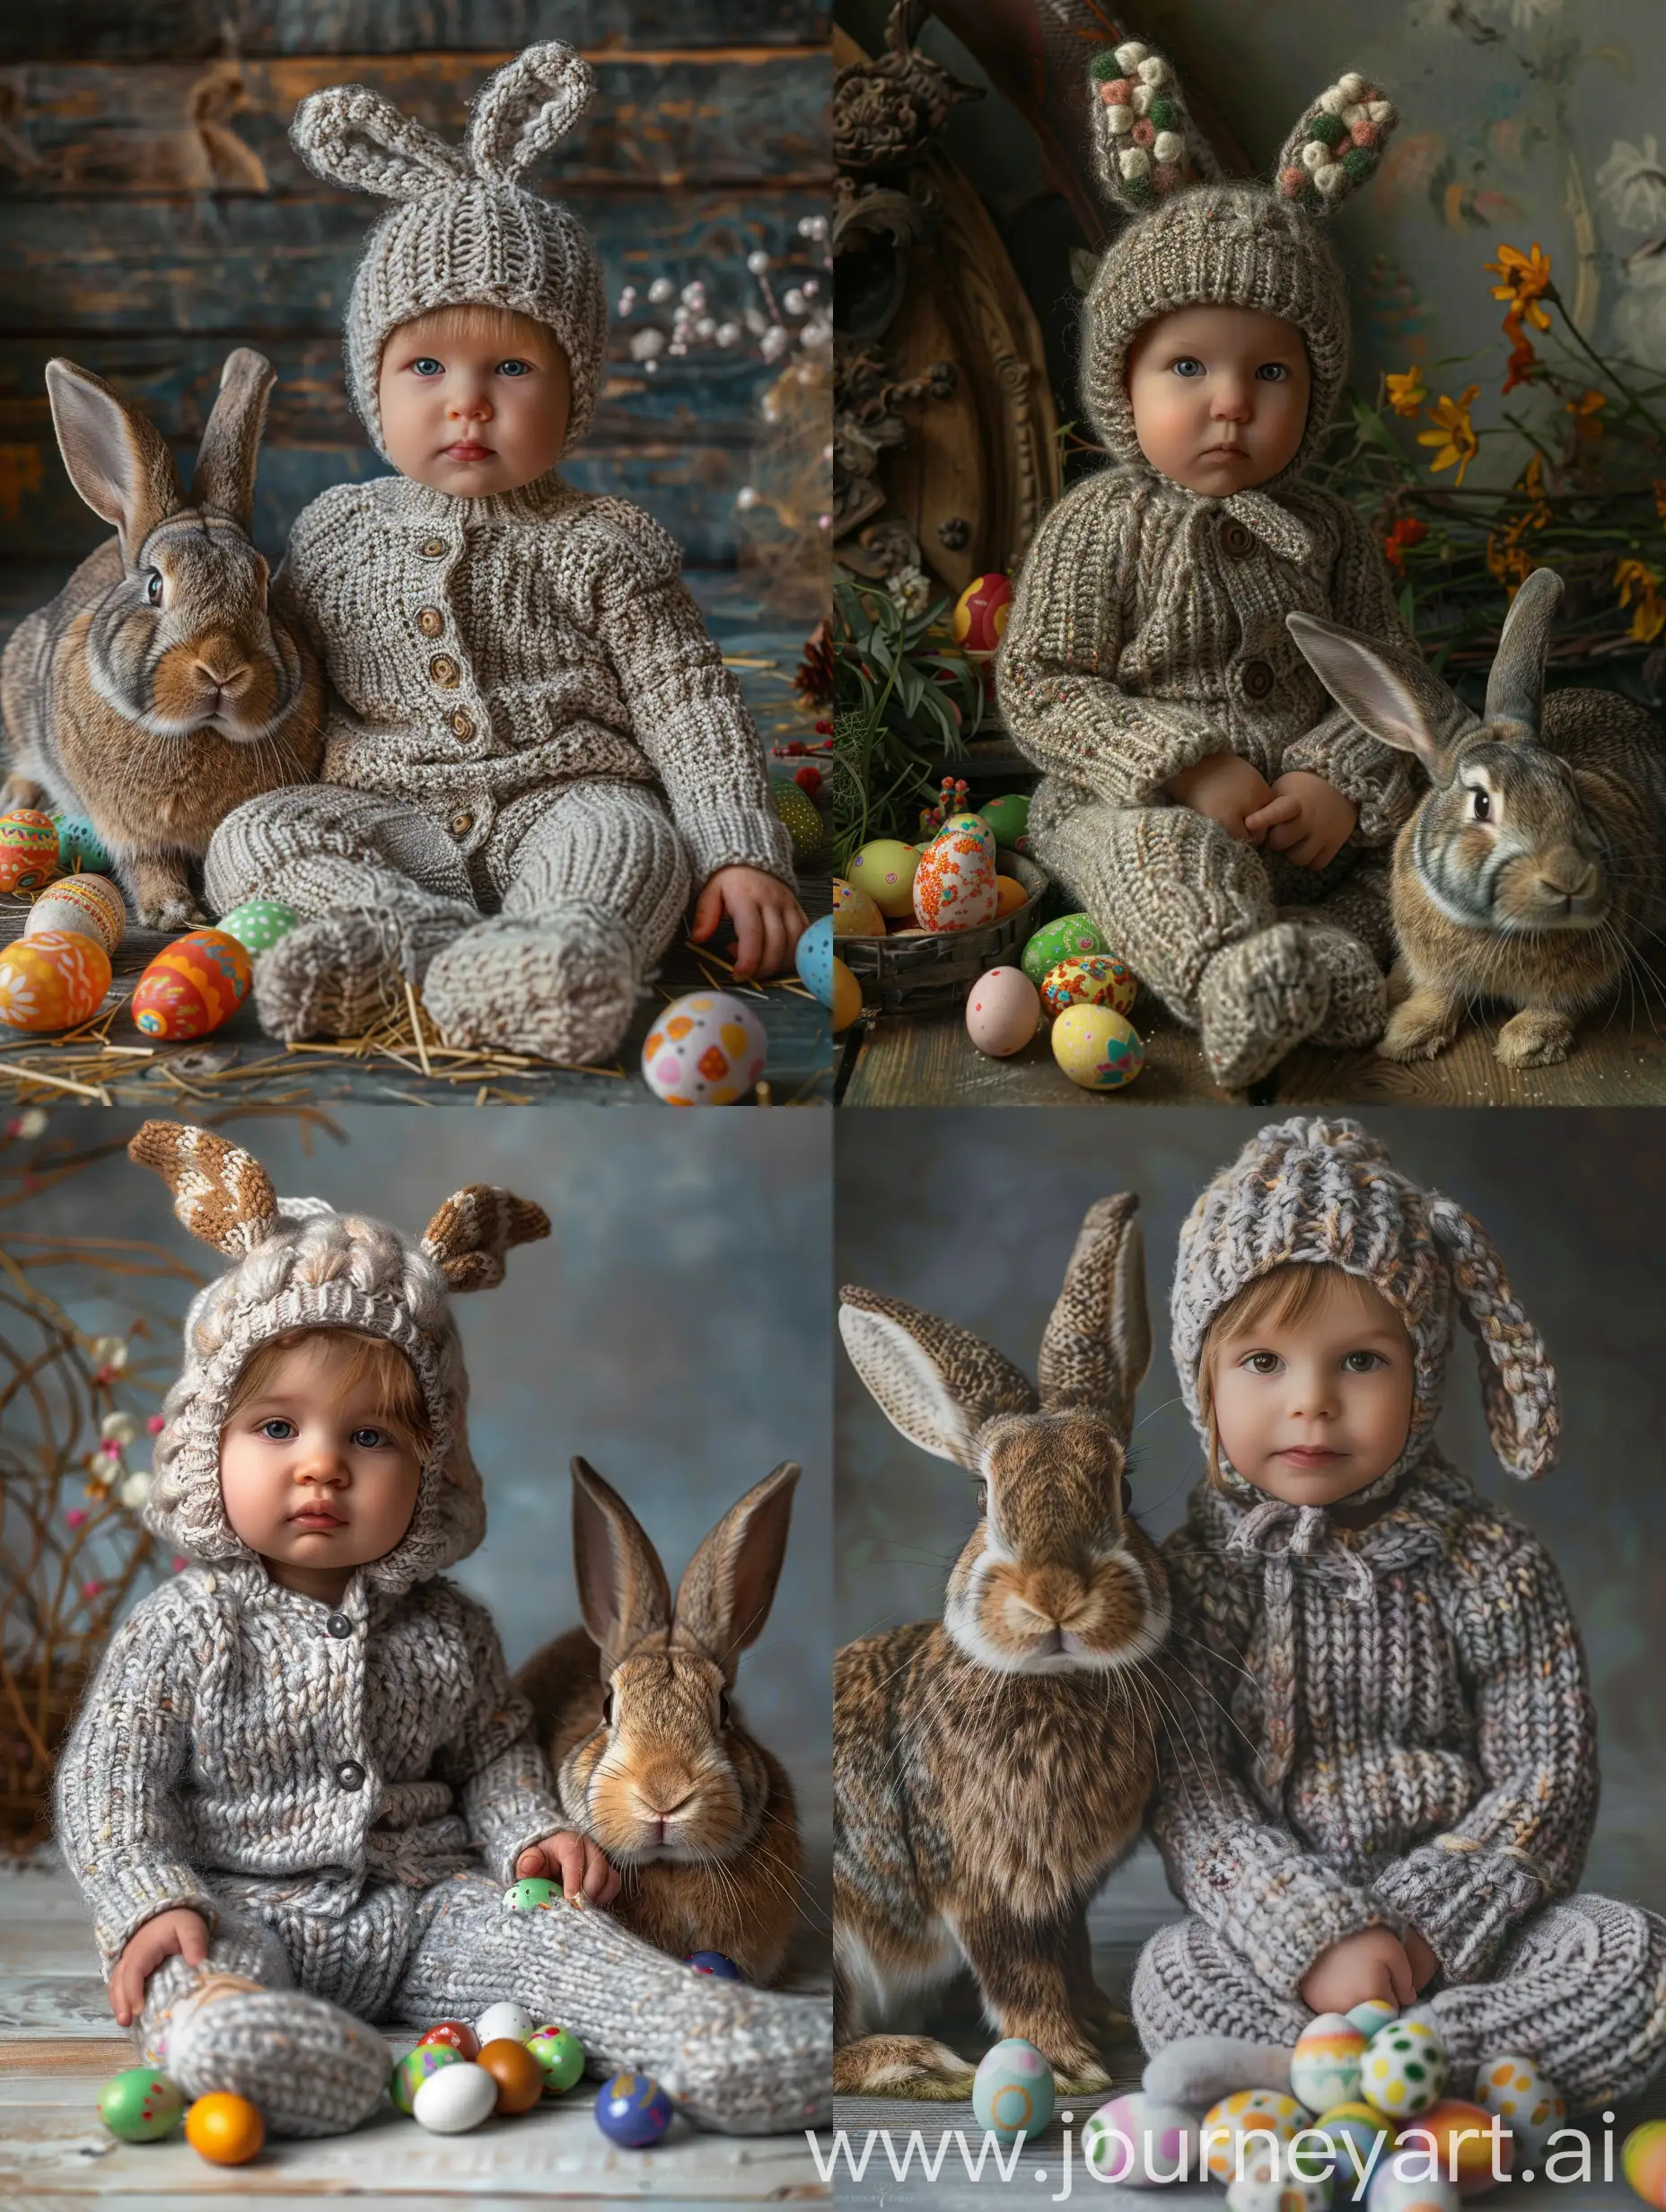 Portrait Small child sitting in a knitted suit, in a hat with knitted bunny ears, next to a live rabbit, his face is clearly visible, looking directly into the camera, next to lying multicolored Easter eggs, detail, hyperrealism portrait shooting close-up, delicate colors